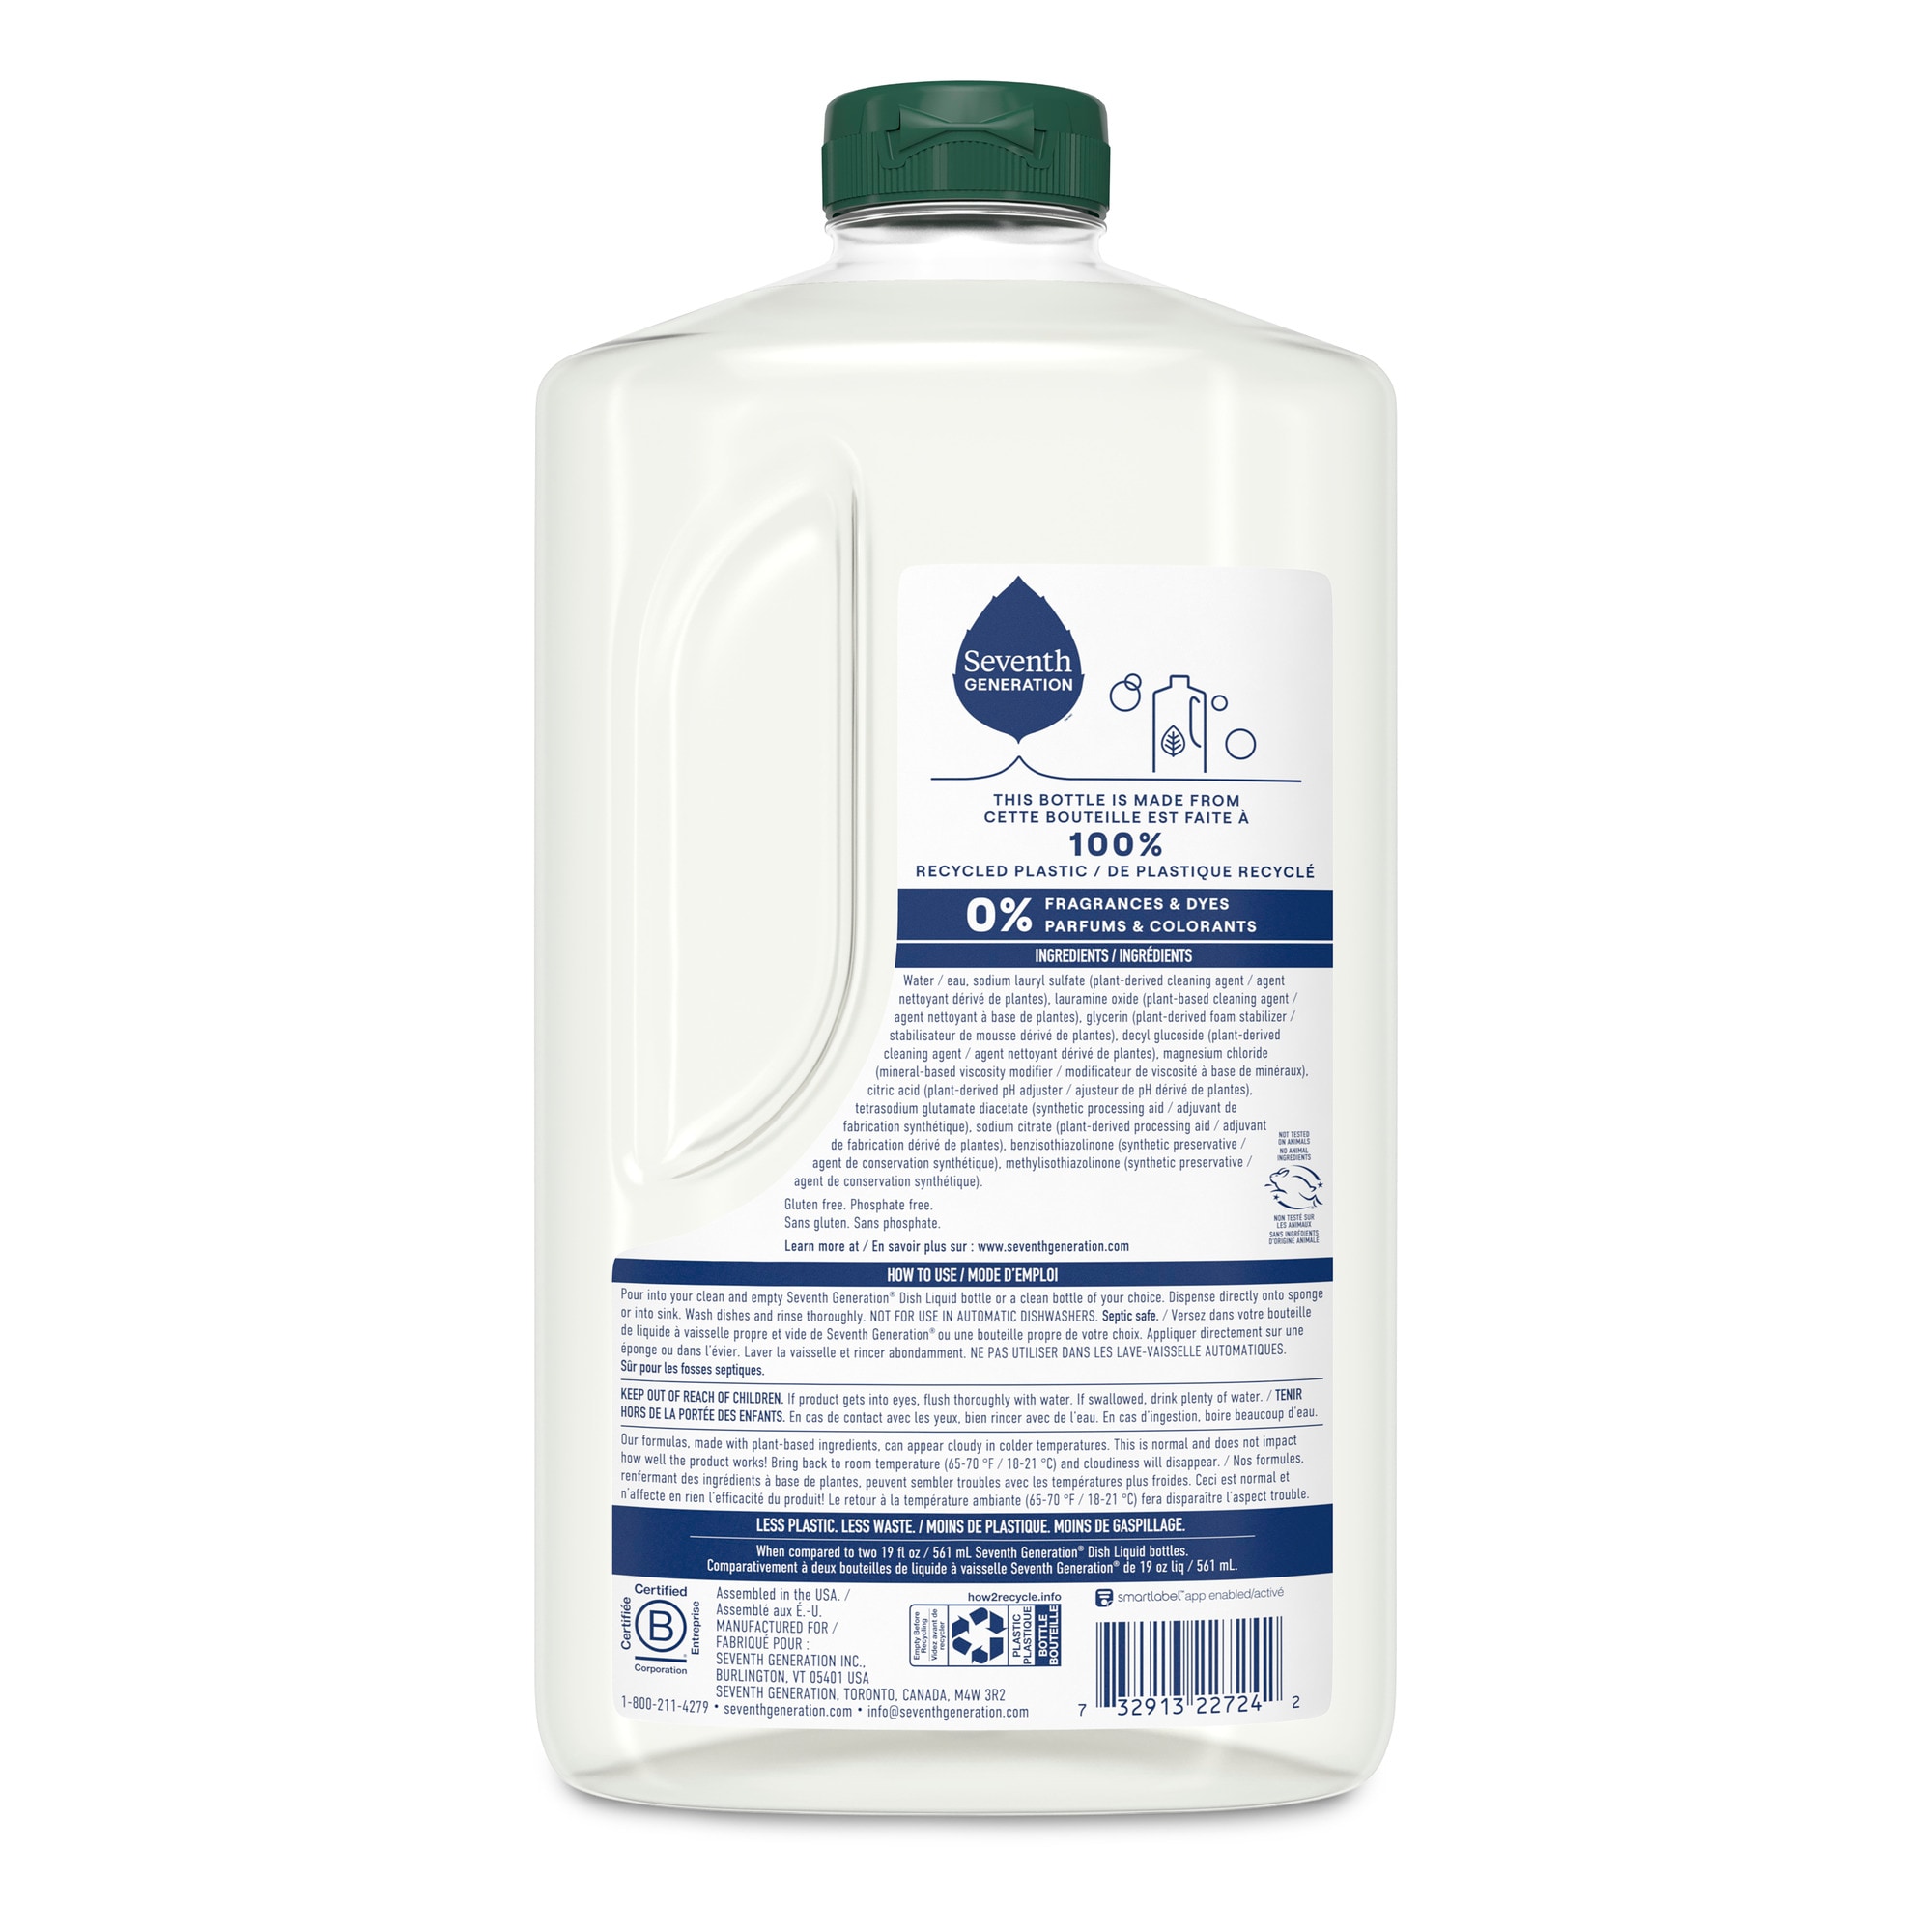 ECOS® Baby Bottle Wash & Dish Soap, 17 fl oz - Fry's Food Stores